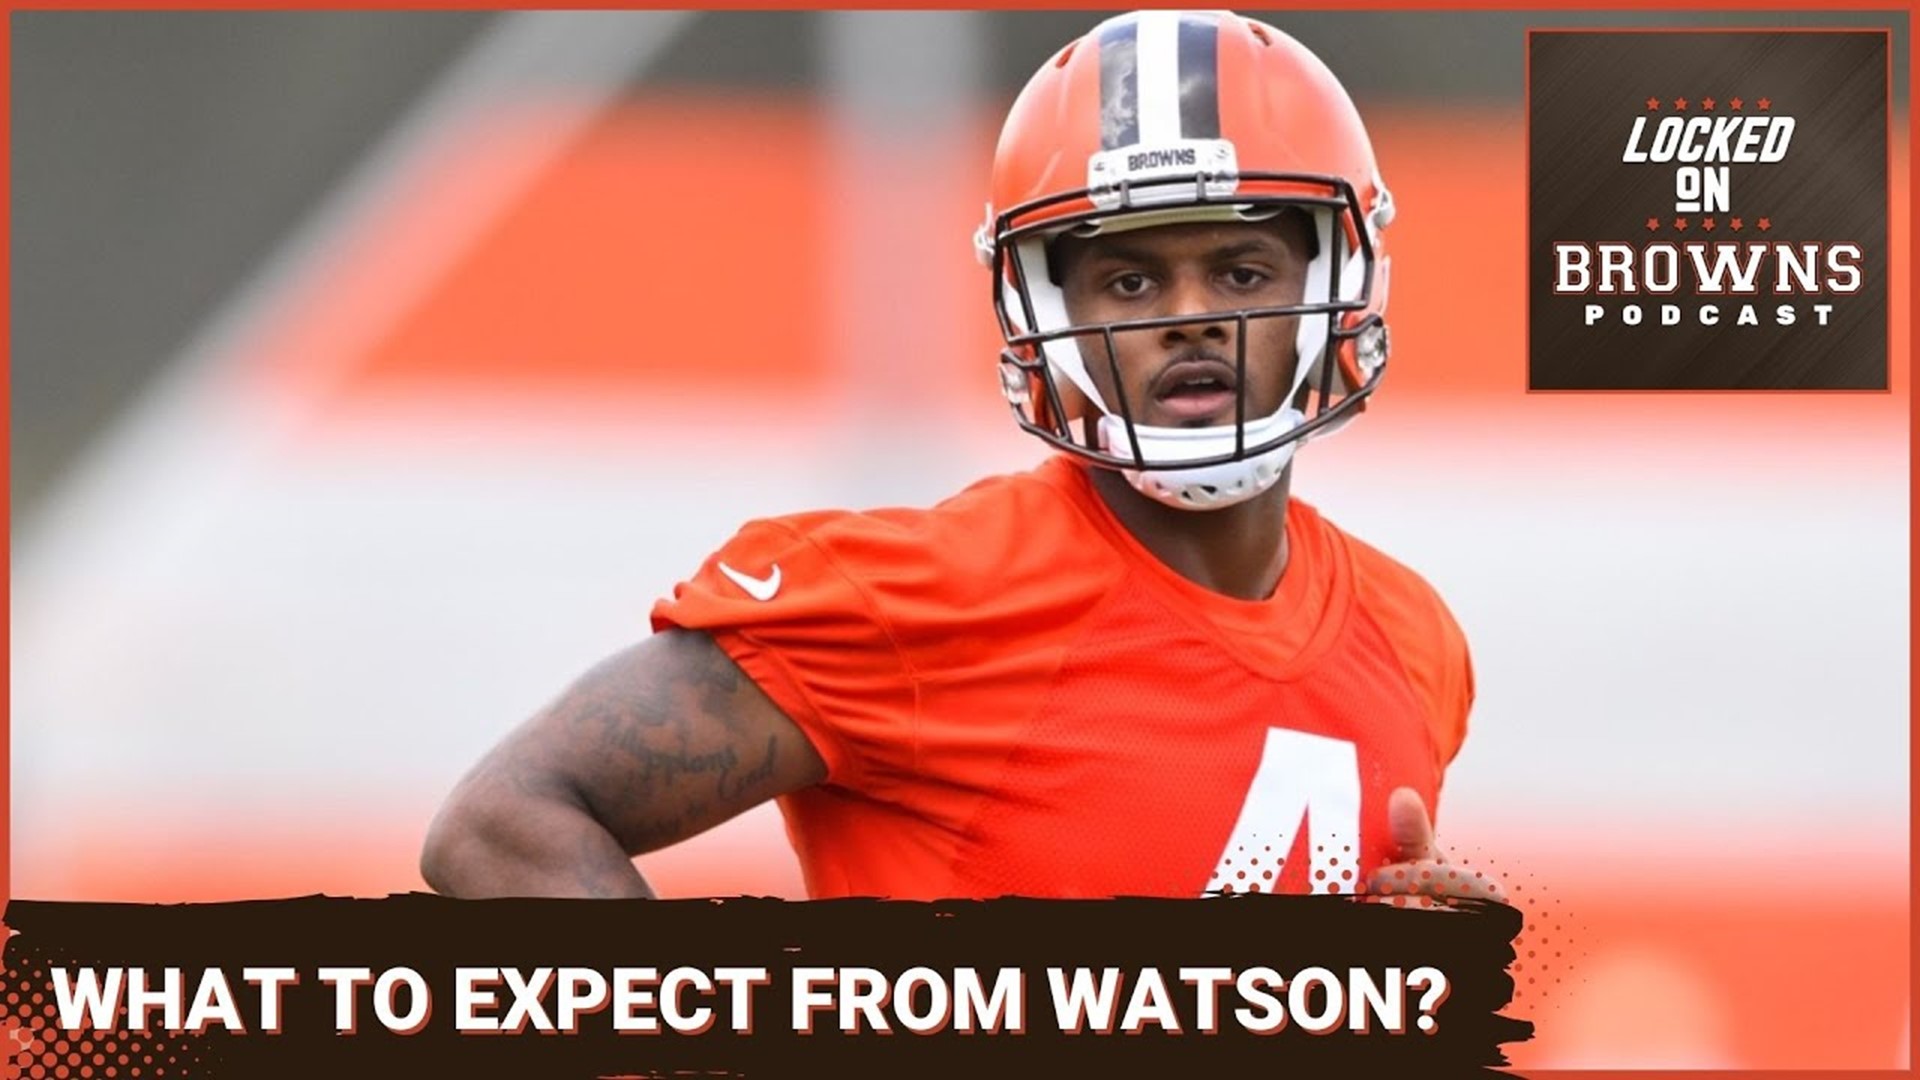 Deshaun Watson will join the Cleveland Browns lineup on Sunday after serving an 11-game suspension as the team takes on the Houston Texans.